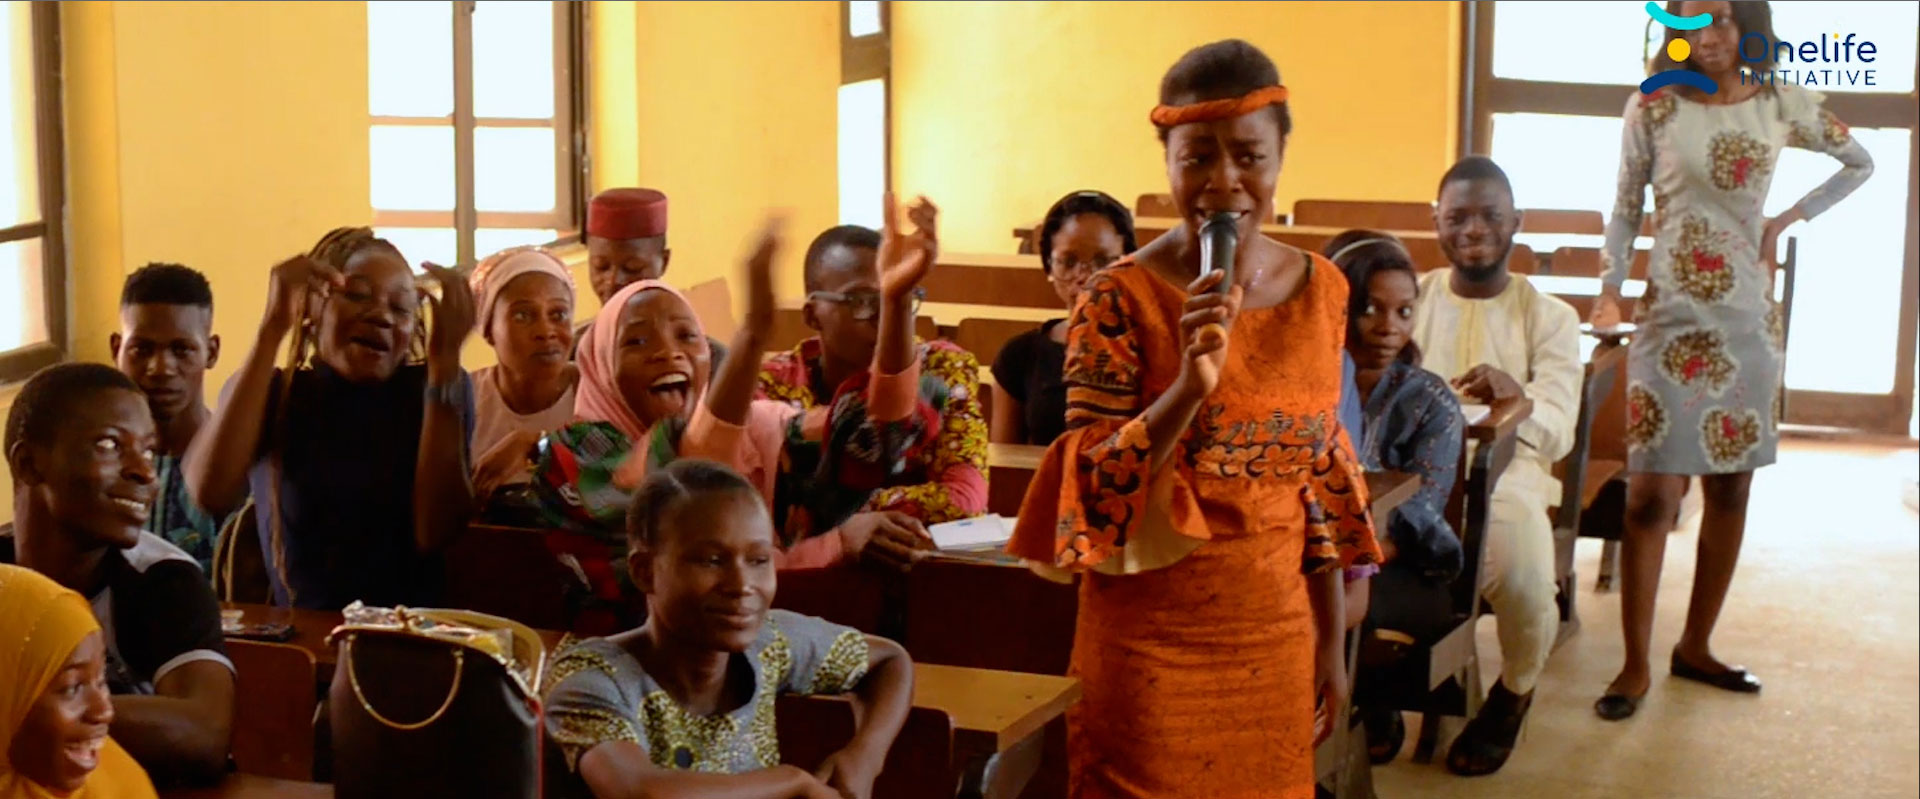 A young woman in an orange dress stands speaking into a microphone in a Nigerian classroom full of smiling students who are raising their hands in joy reacting to her speech